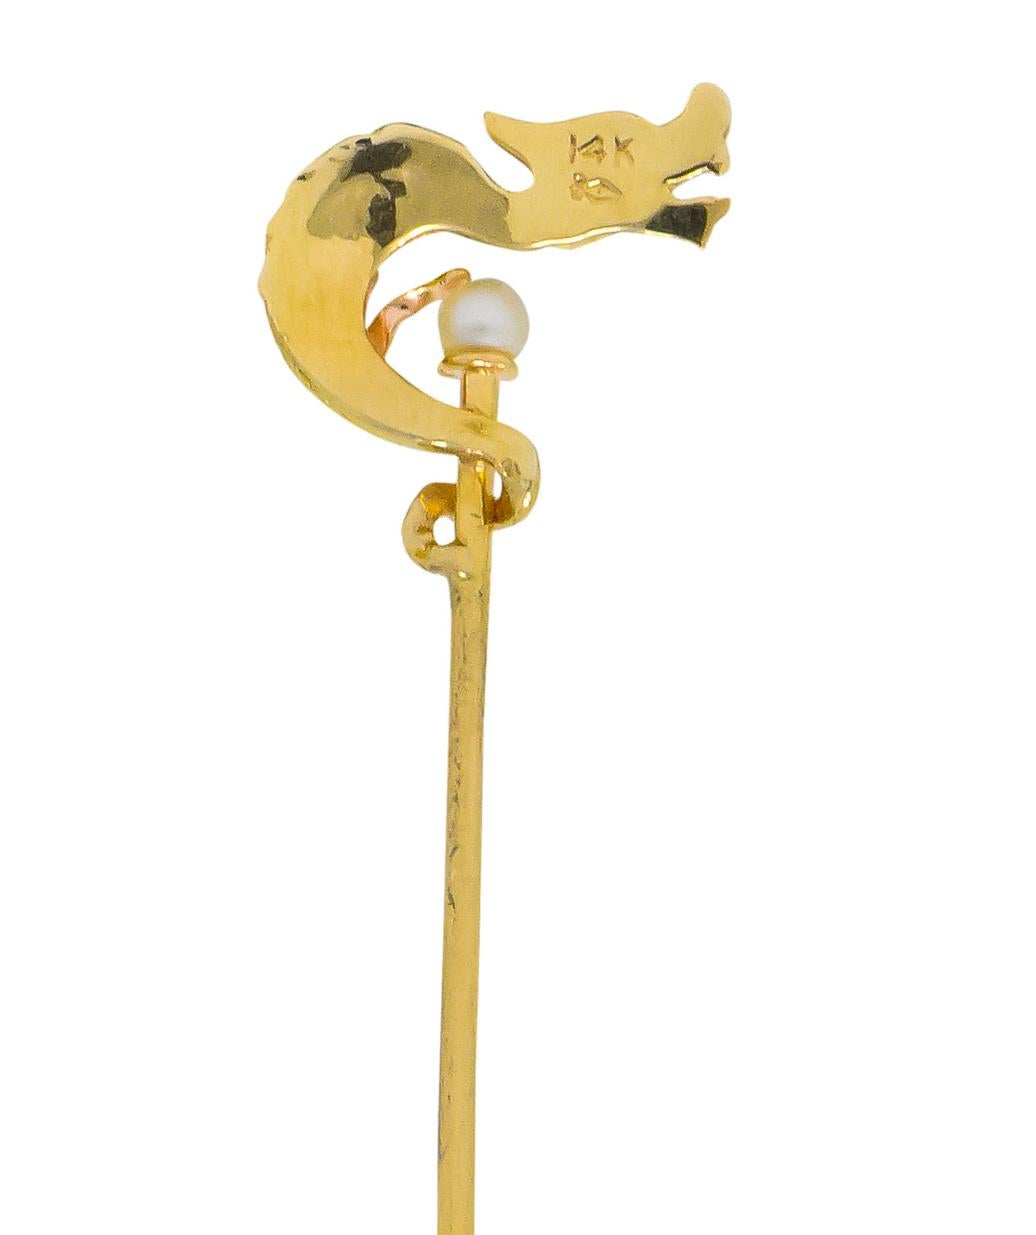 Carter Gough & Co. Edwardian Pearl 14 Karat Tri-Colored Gold Dragon Stickpin In Excellent Condition For Sale In Philadelphia, PA